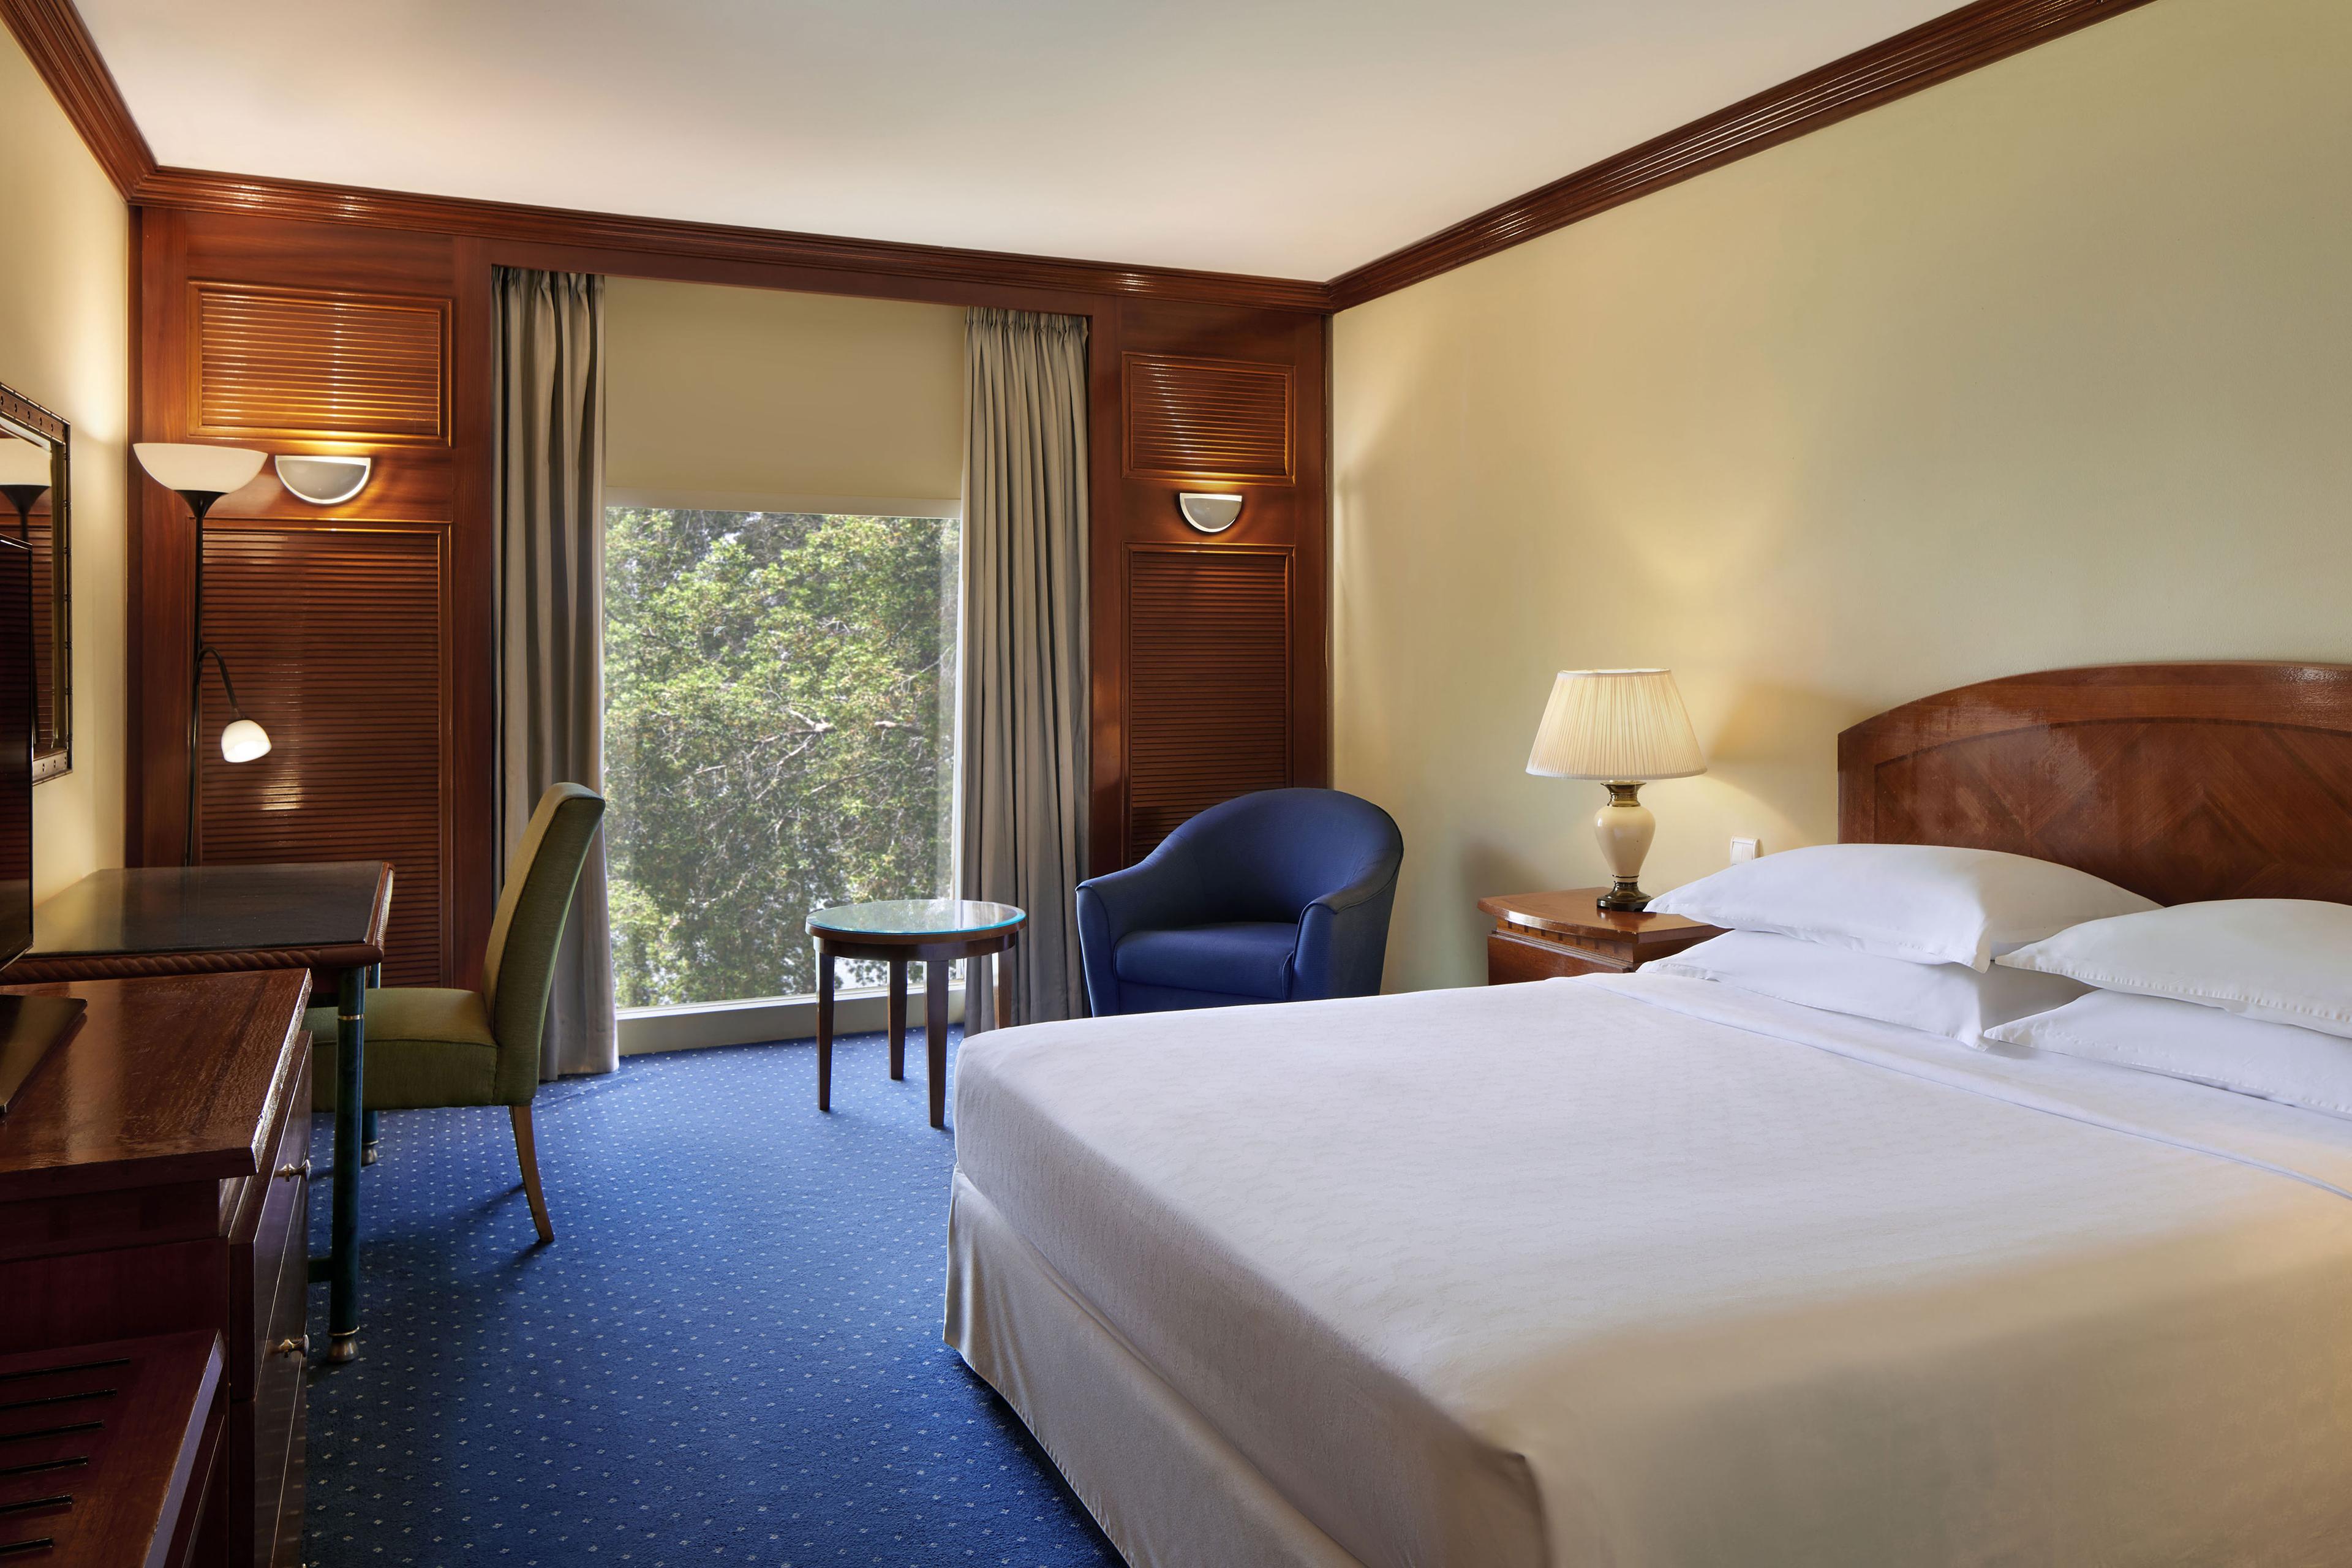 Our guest rooms are the perfect choice for both business and leisure travelers